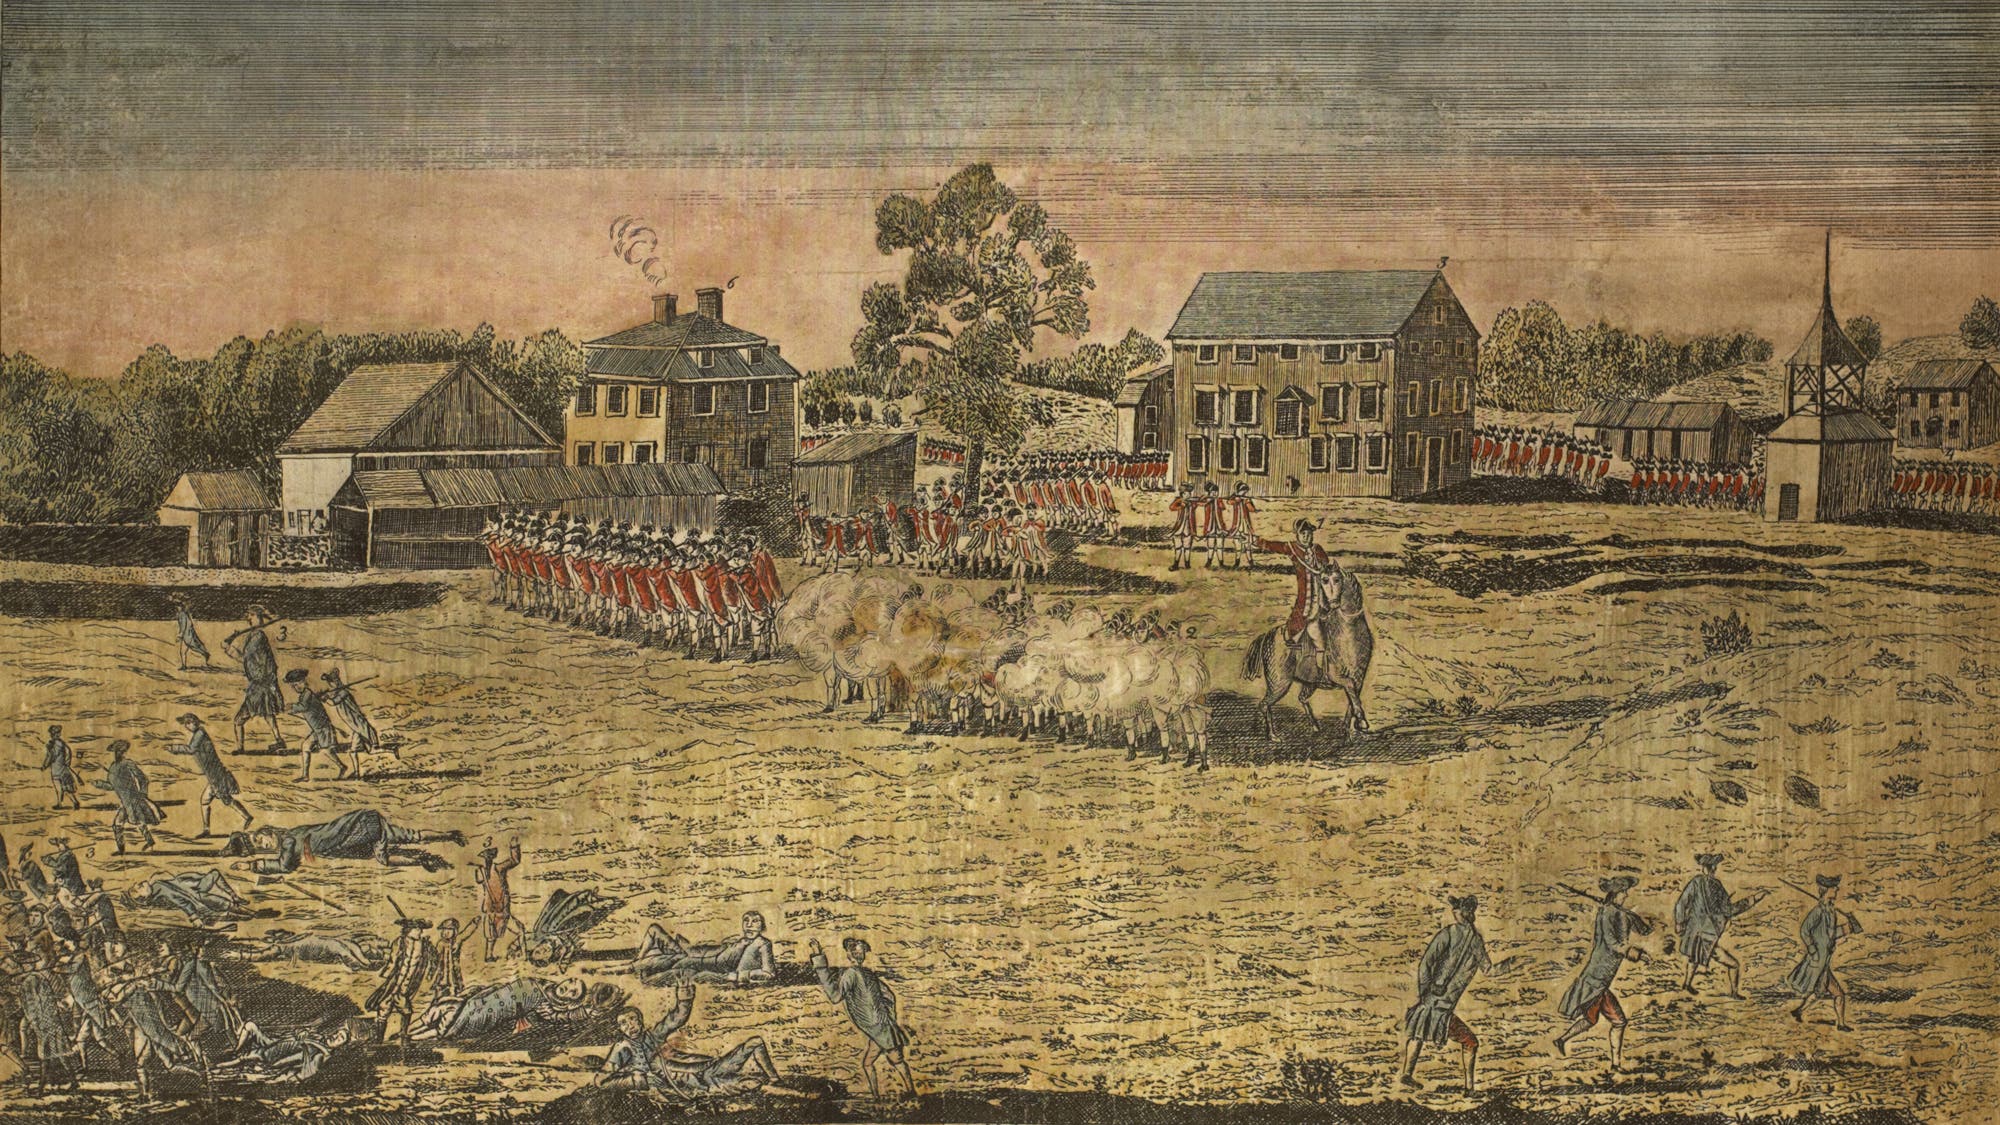 HISTORY: The Battles of Lexington and Concord